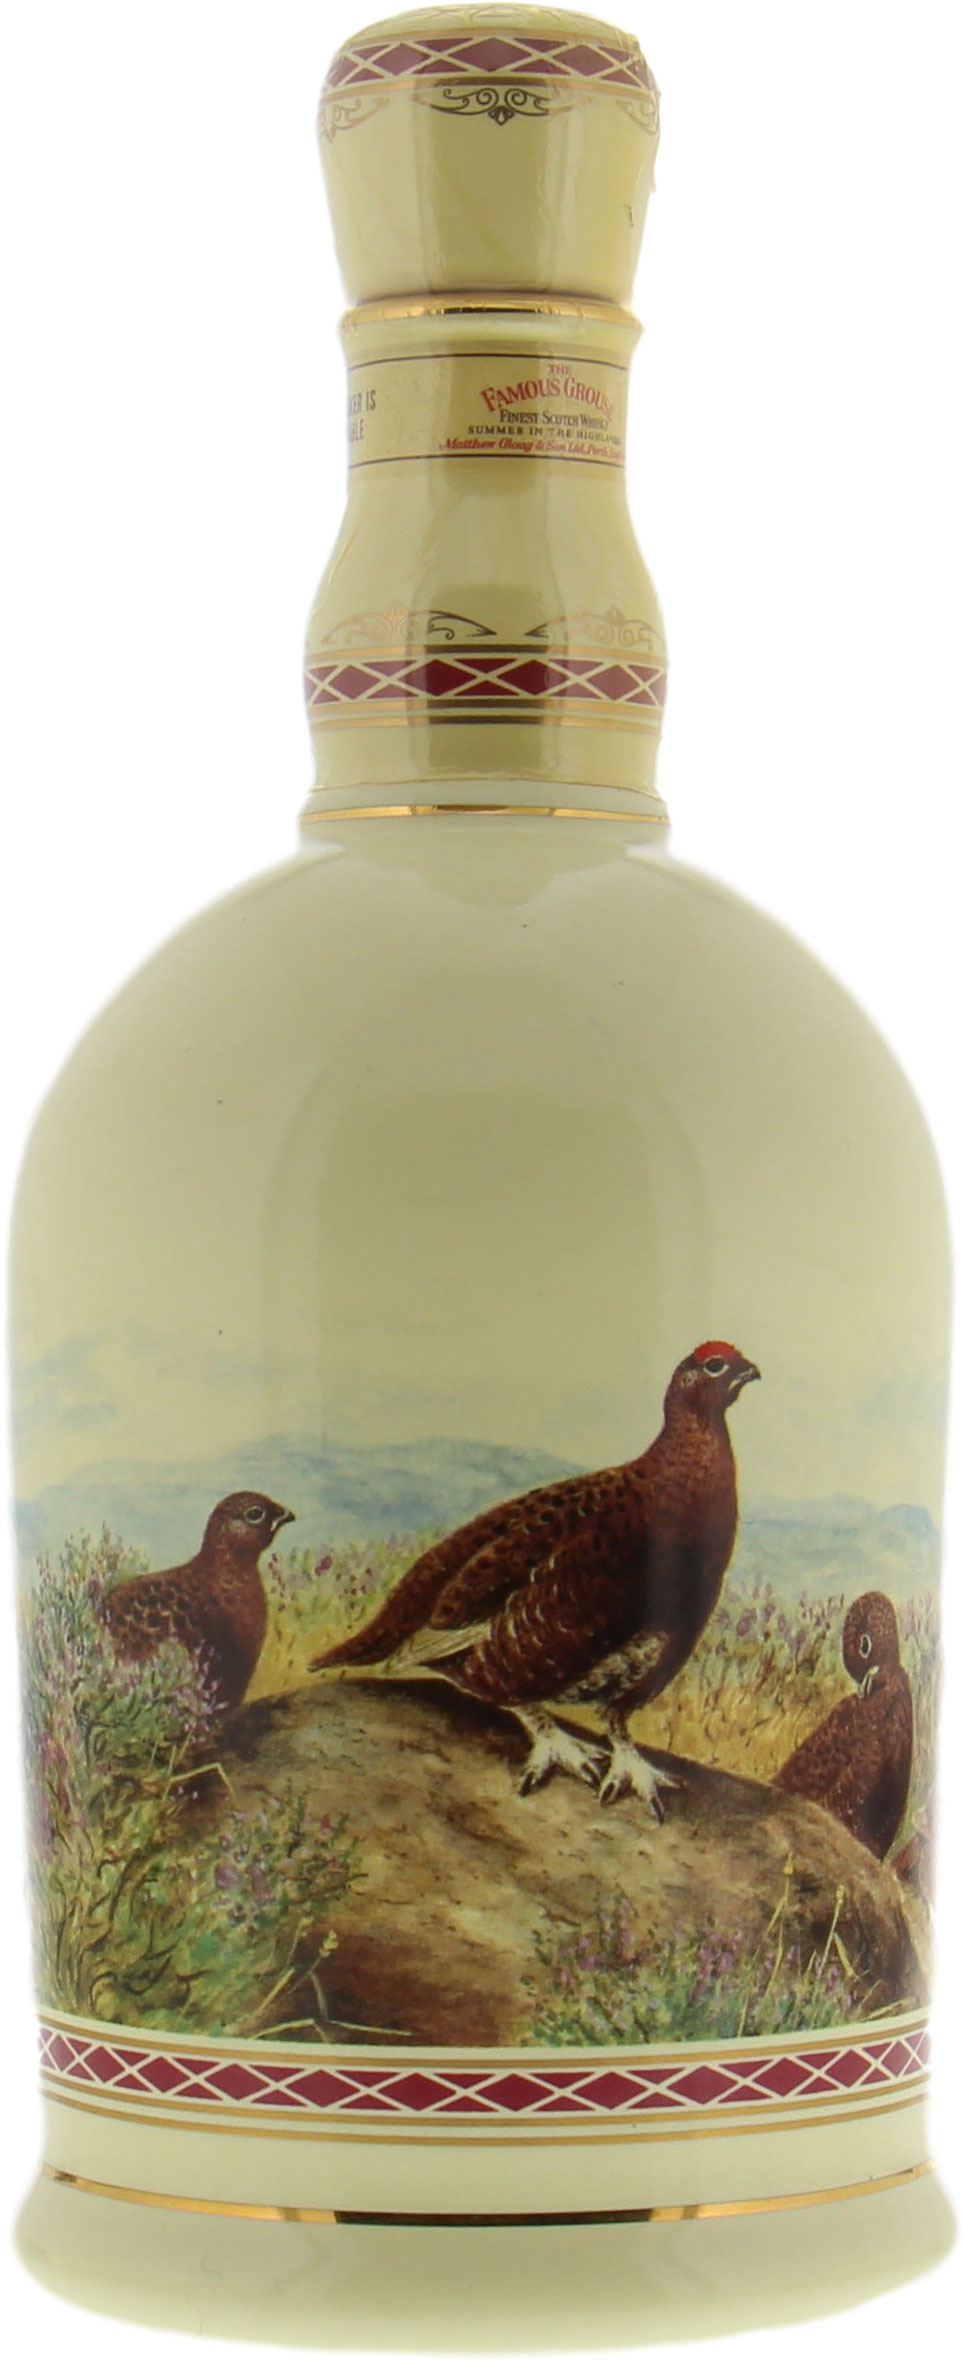 The Famous Grouse - Highland Ceramic Decanter 40% NV